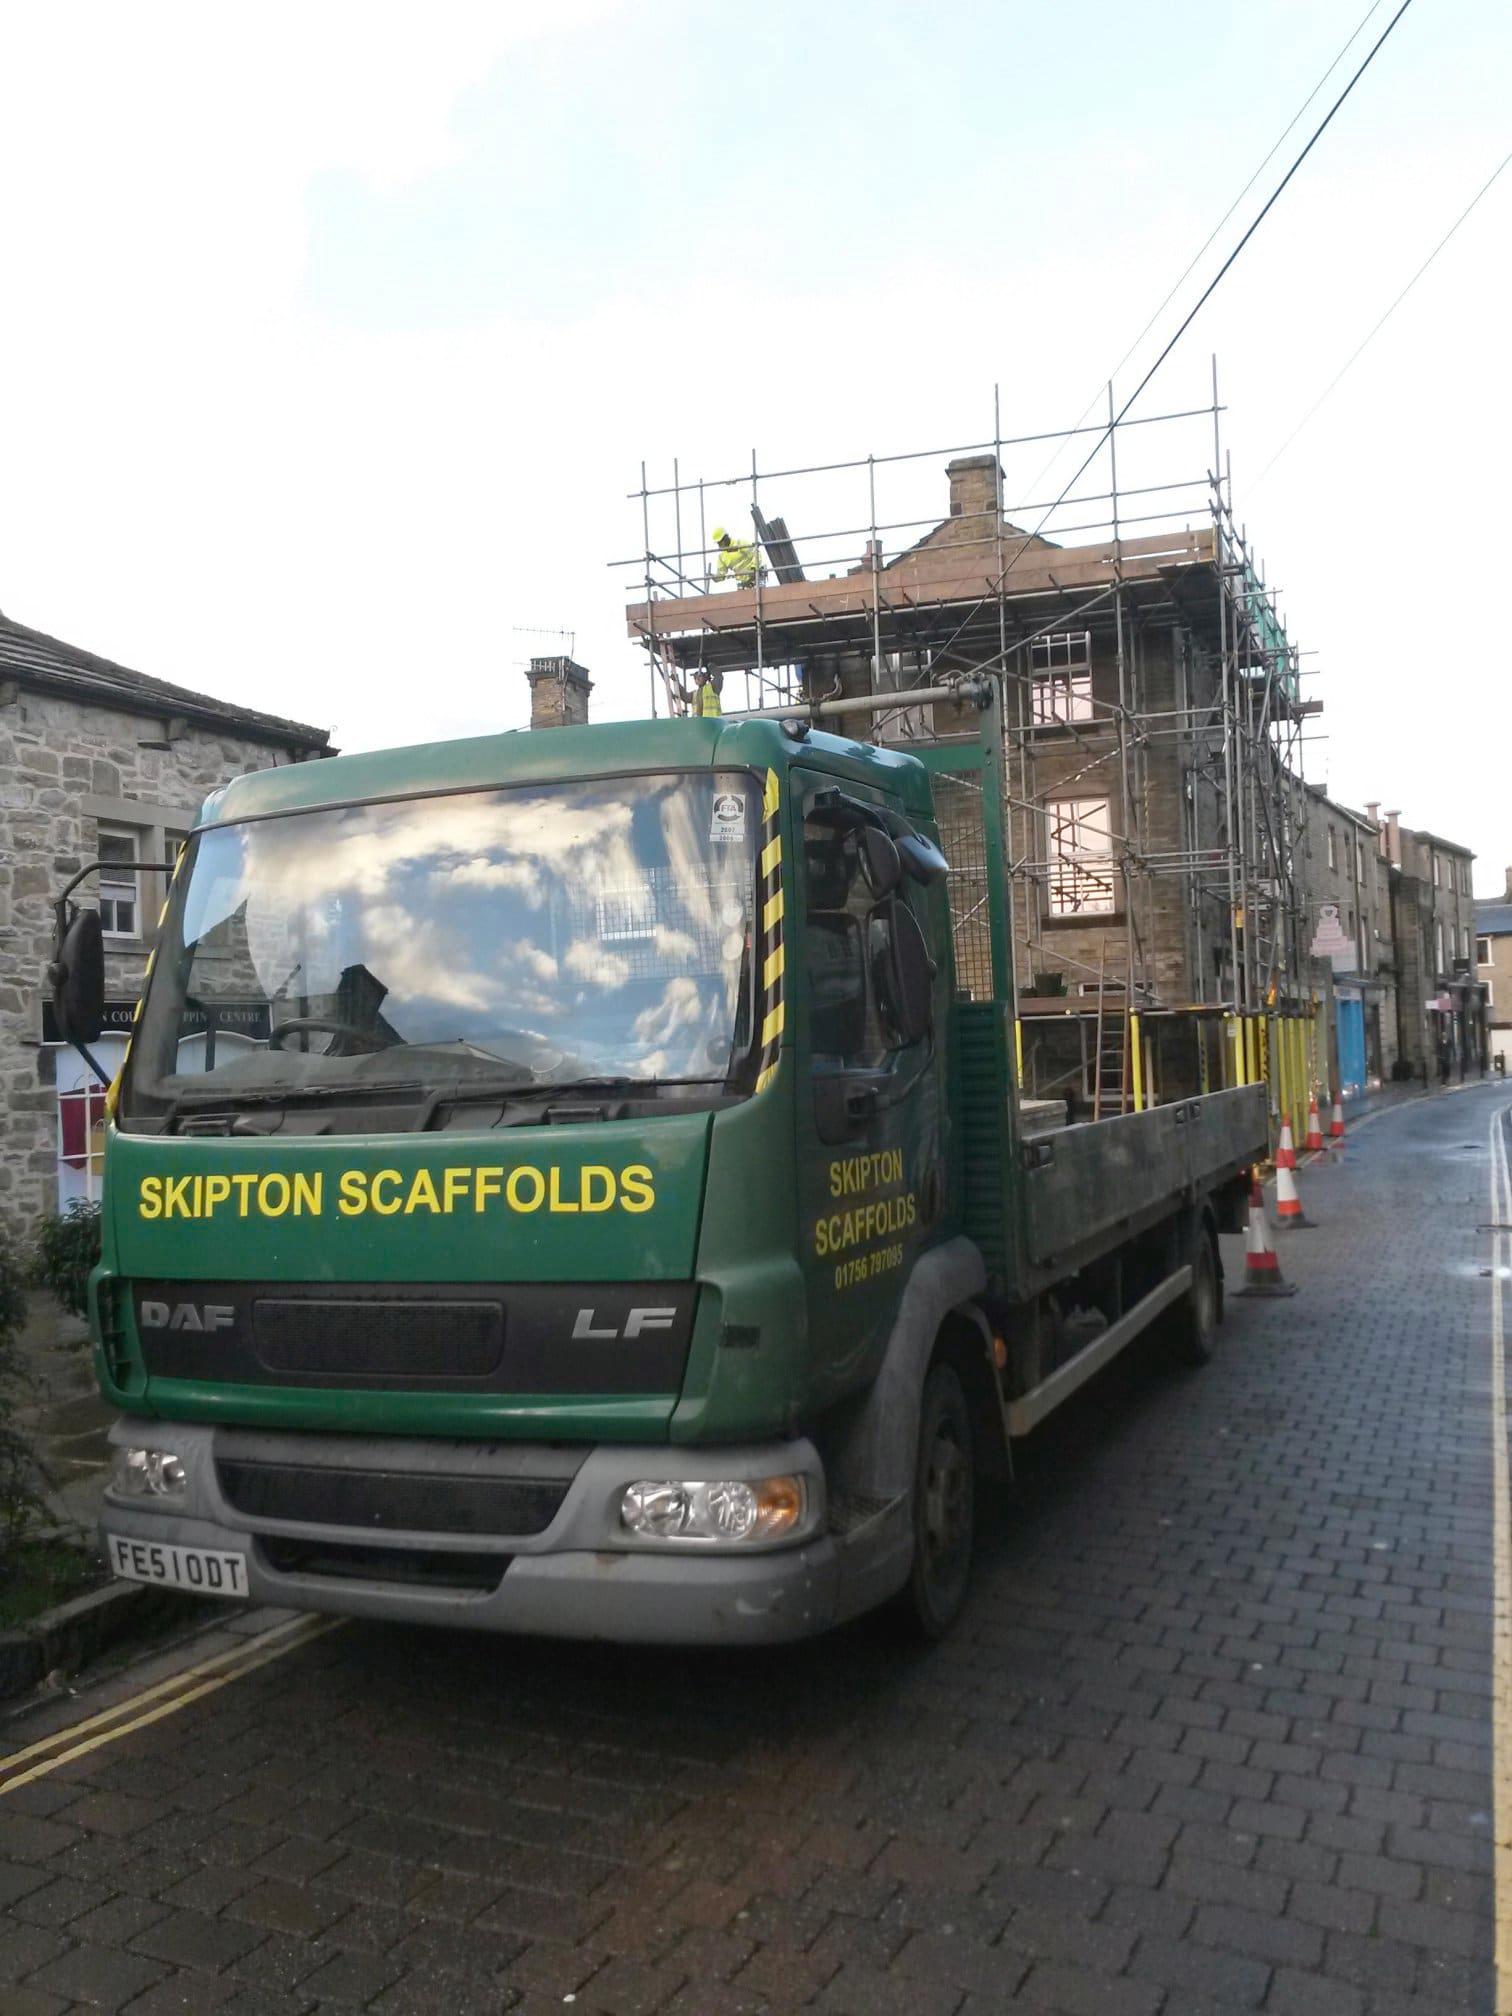 Images Skipton Scaffolds